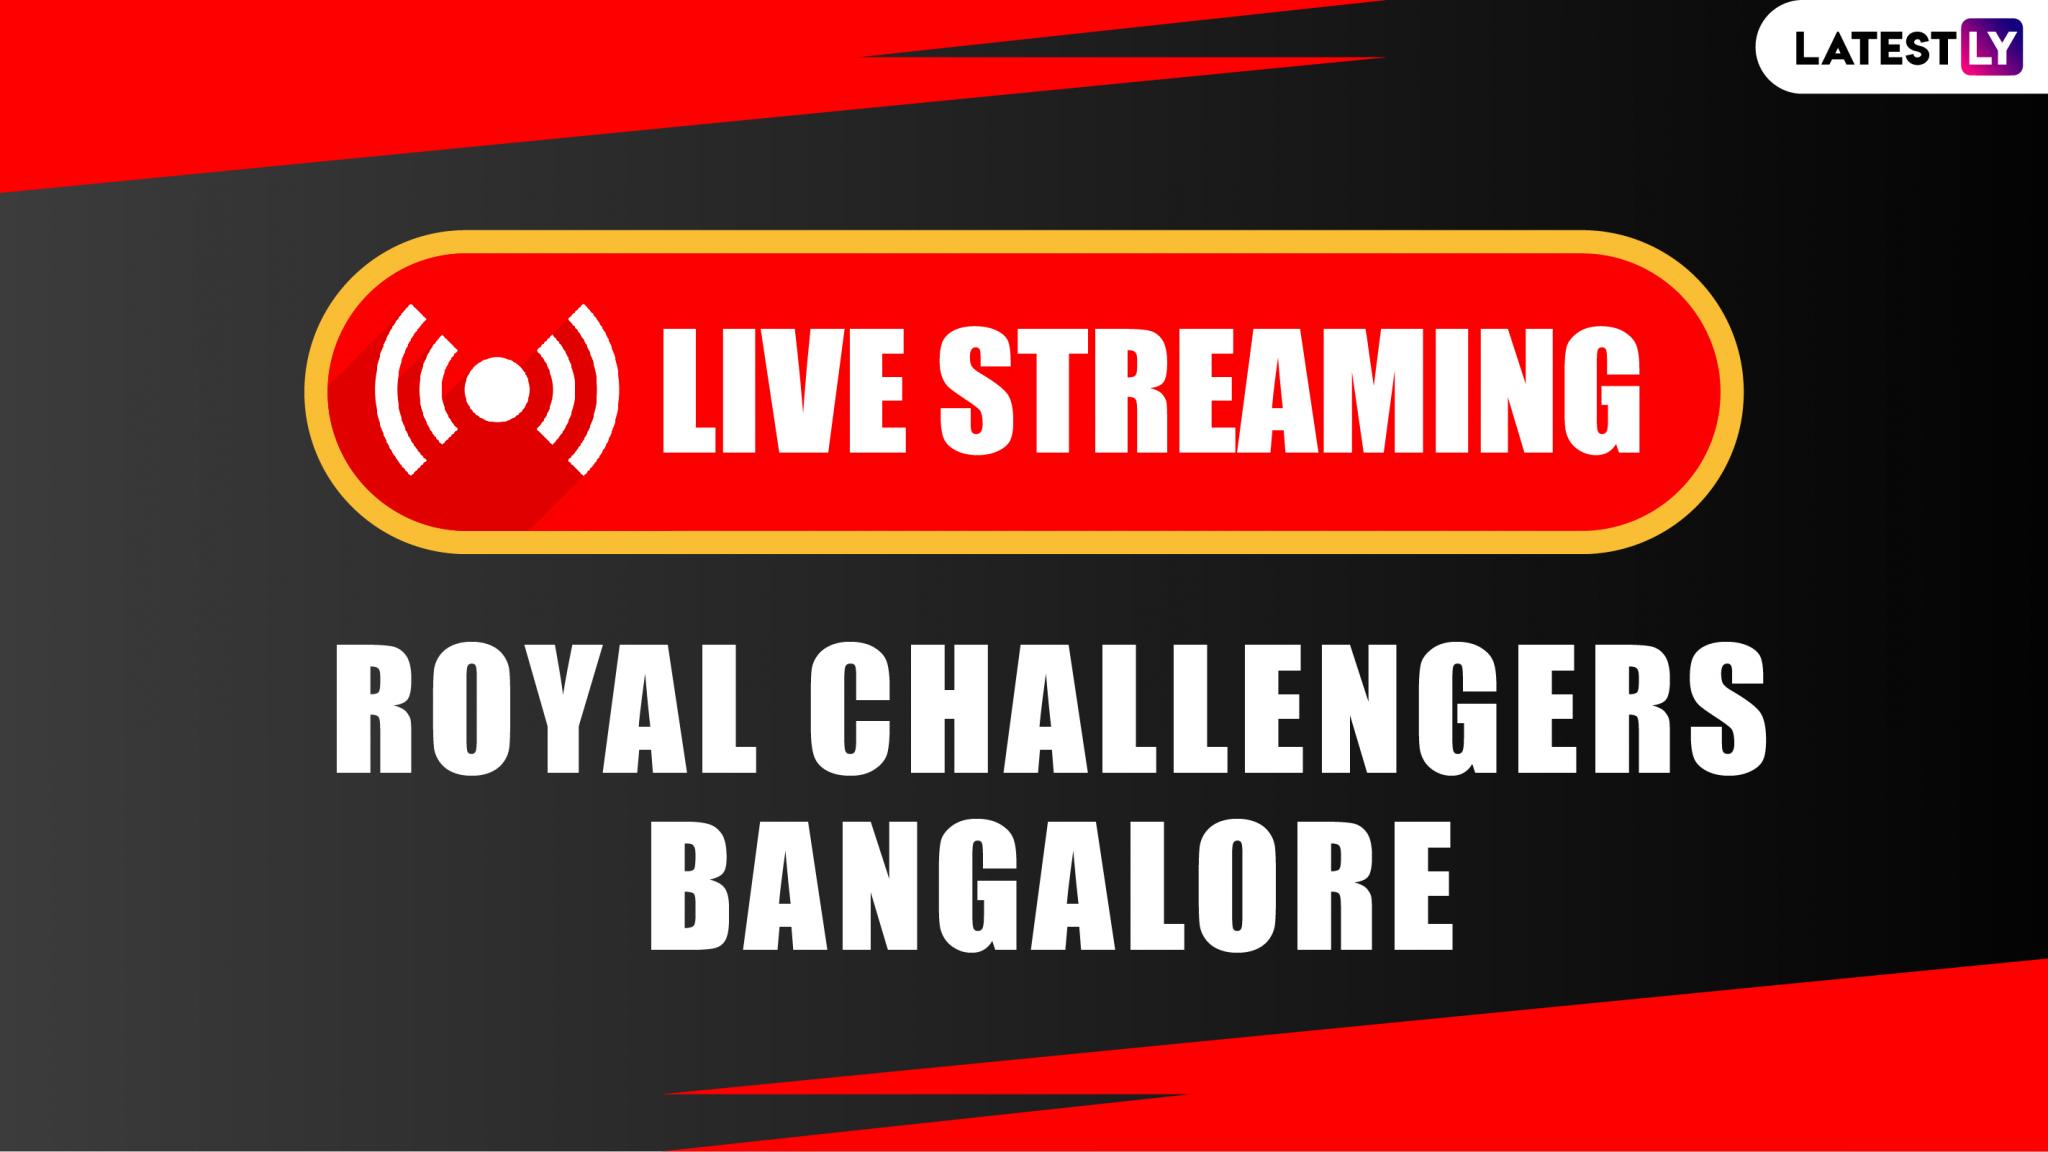 Cricket News Dream11 IPL 2020 Live Streaming Online and Telecast of RCB Matches on Star Sports 1 Kannada 🏏 LatestLY